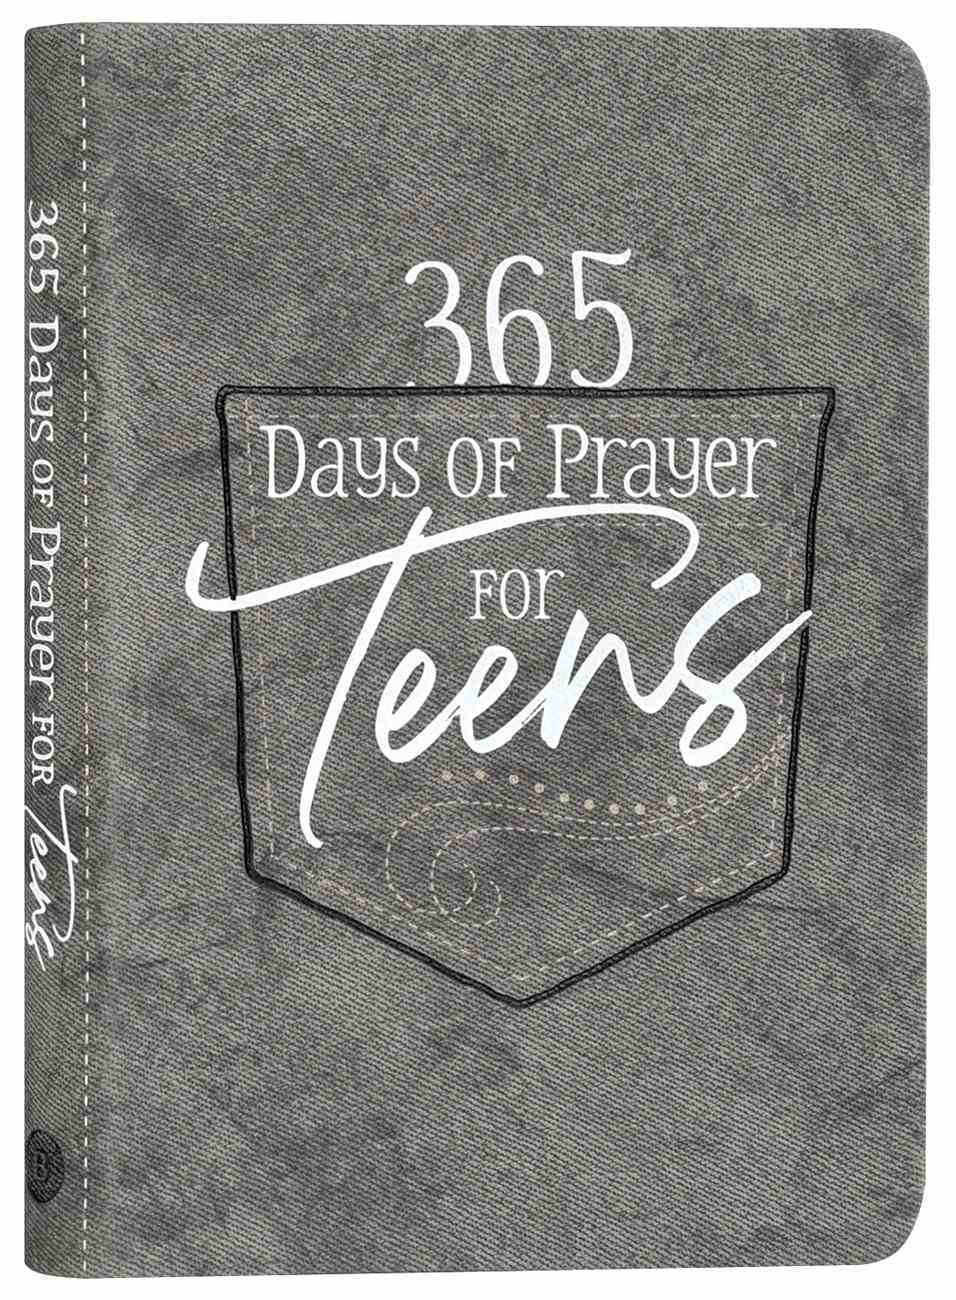 365 Days of Prayer For Teens: Daily Devotional Imitation Leather